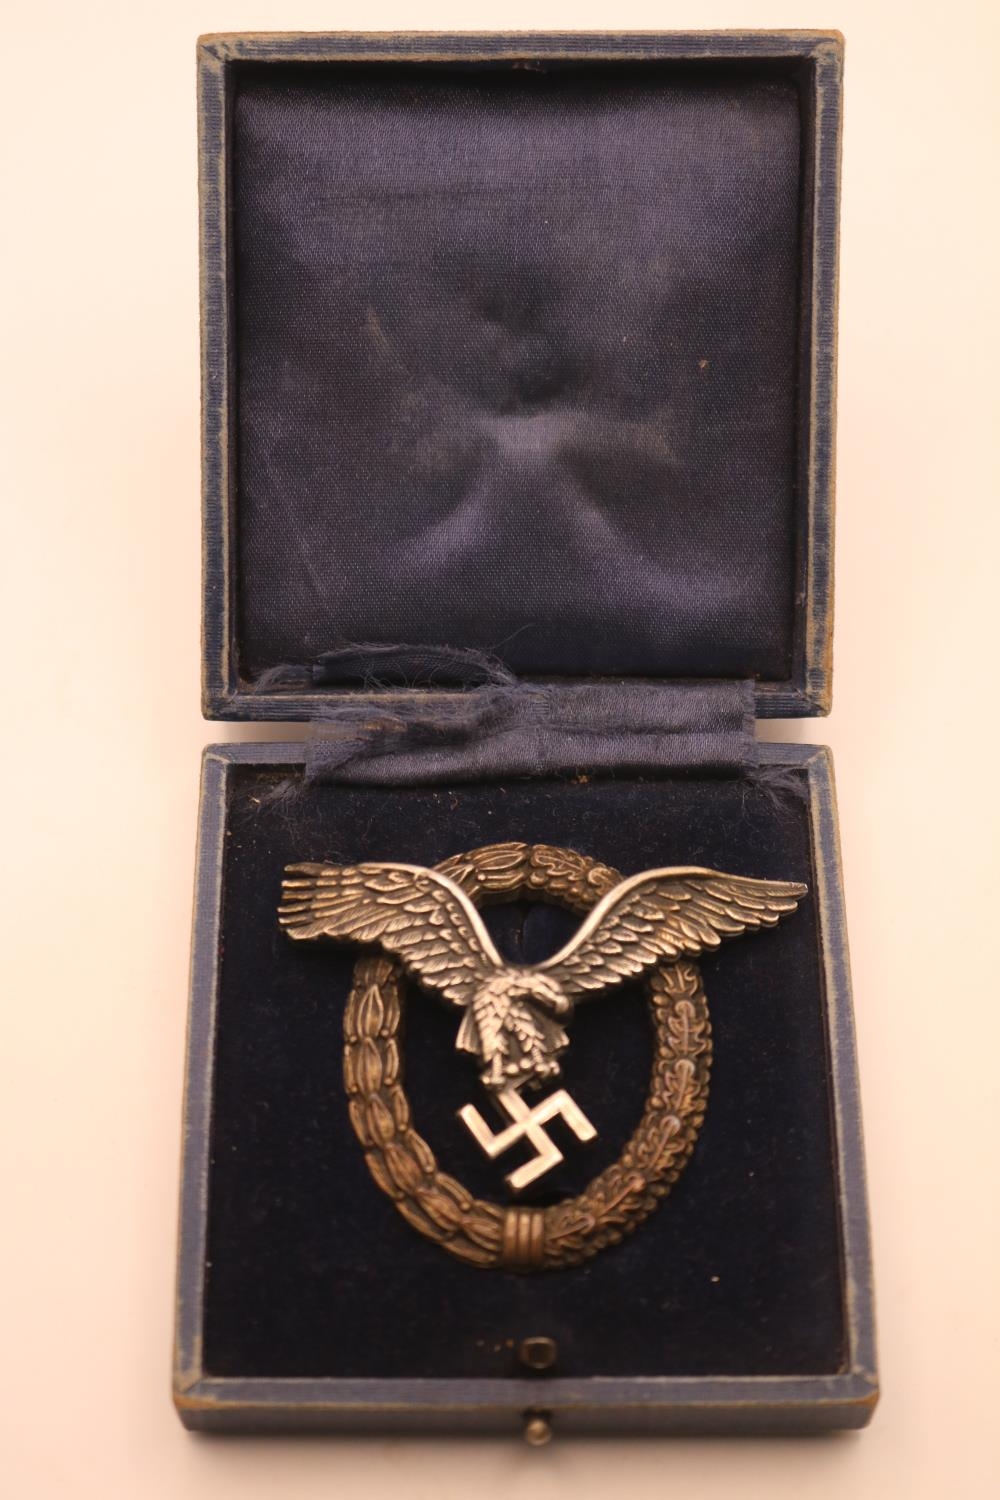 Luftwaffe Pilots Badge by C E Juncker in Original Box of Issue. Good quality two piece example of - Image 2 of 6